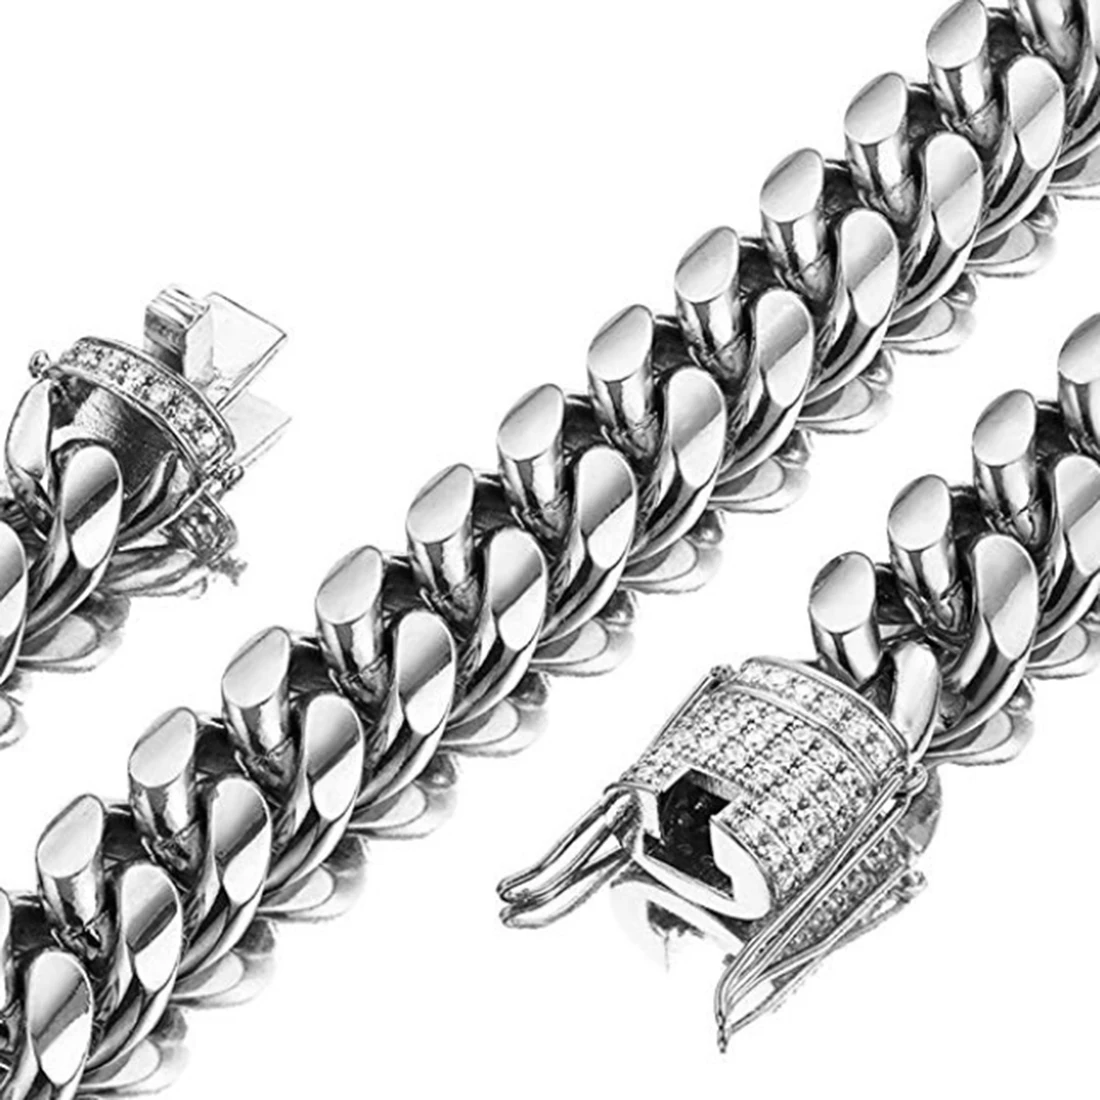 

Top Design Fashion Jewelry 14mm Metal Stainless Steel Silver Color Miami Cuban Curb Chain Mens Womens Necklace Or Bracelet 7-40"